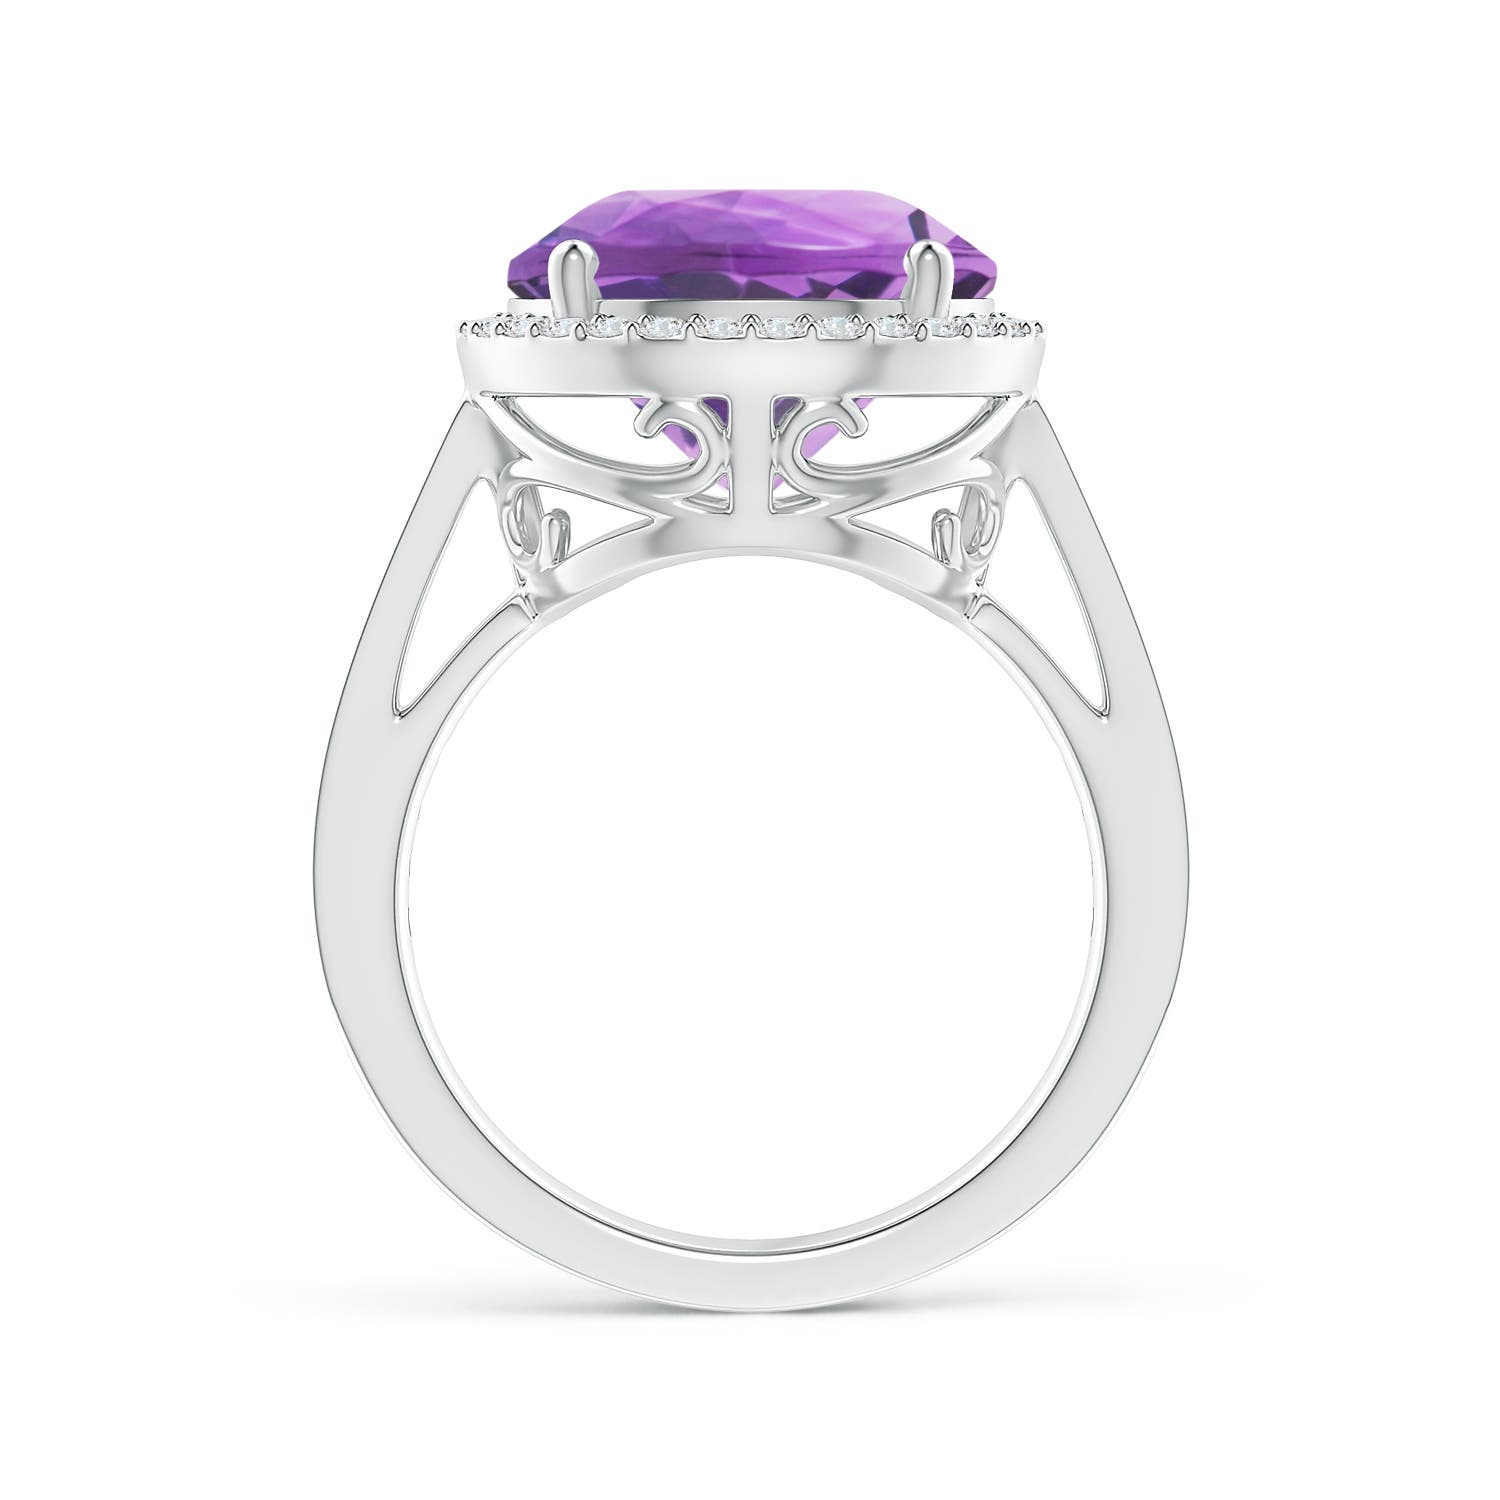 A - Amethyst / 5.94 CT / 14 KT White Gold